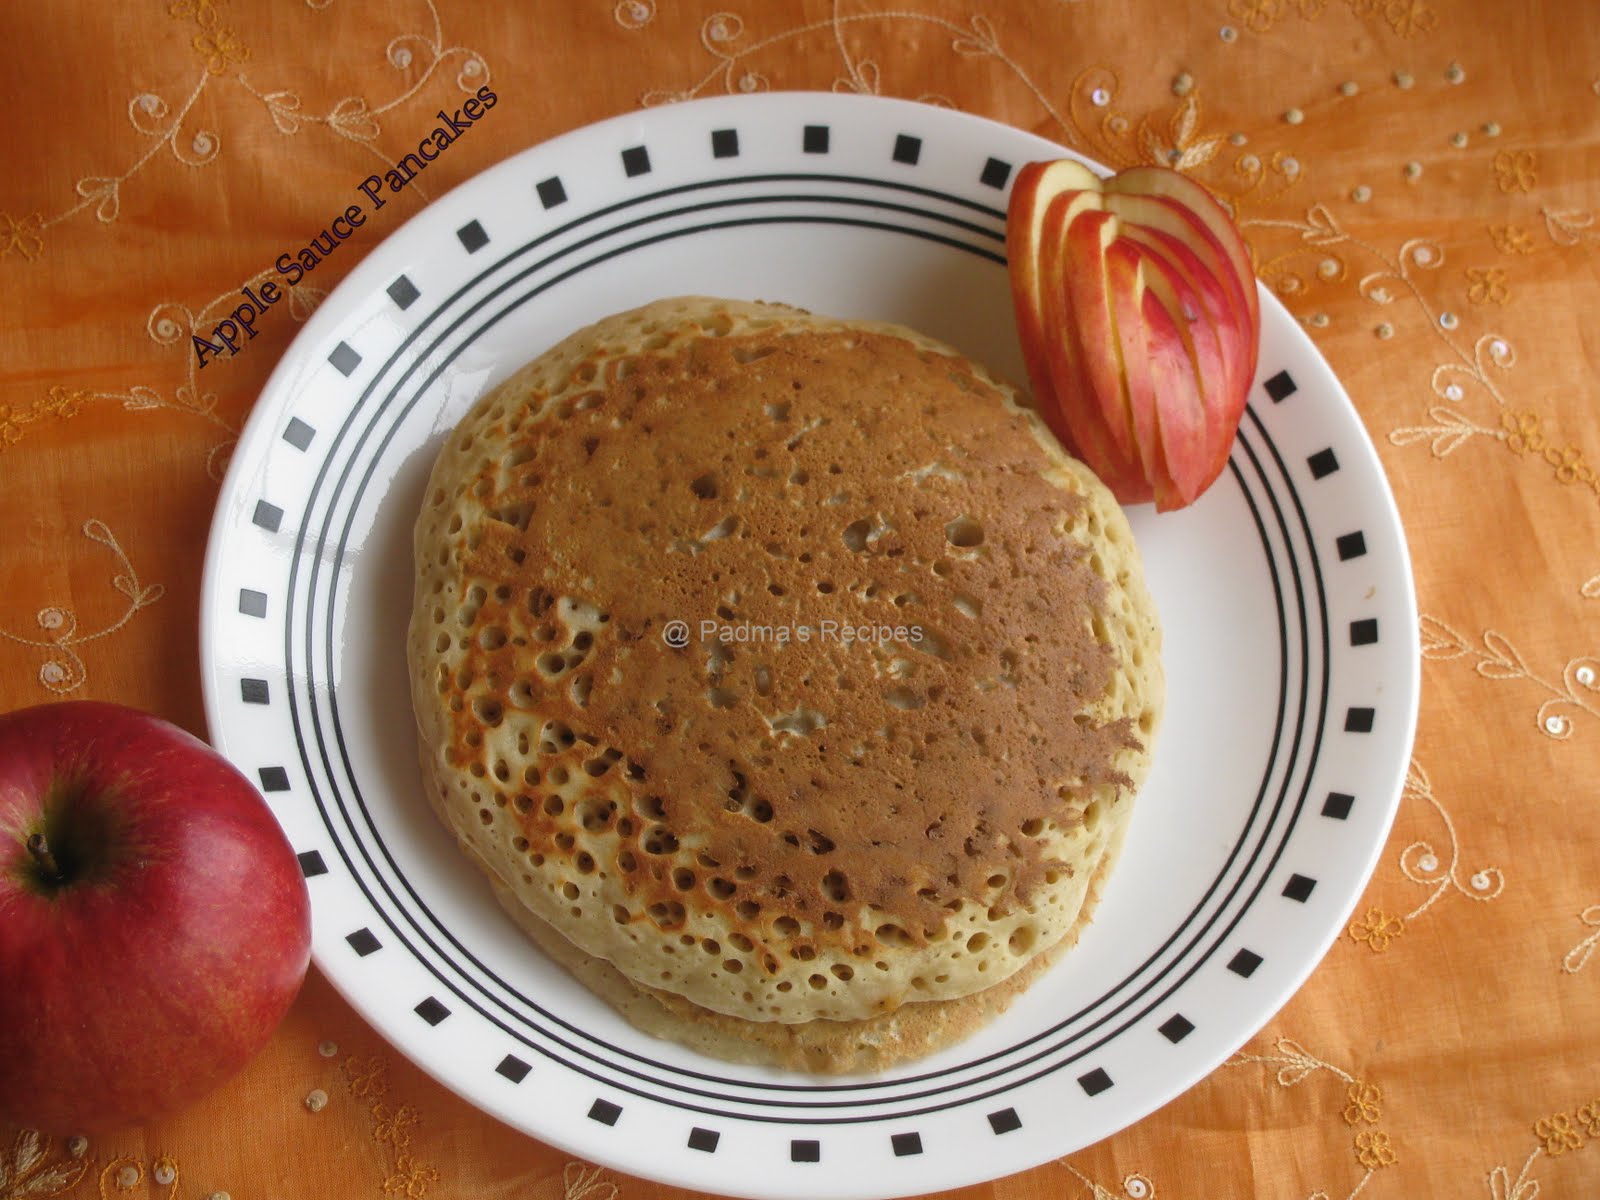 all how pancakes flour SAUCE APPLE purpose scratch  using Padma's Recipes: to make from PANCAKES